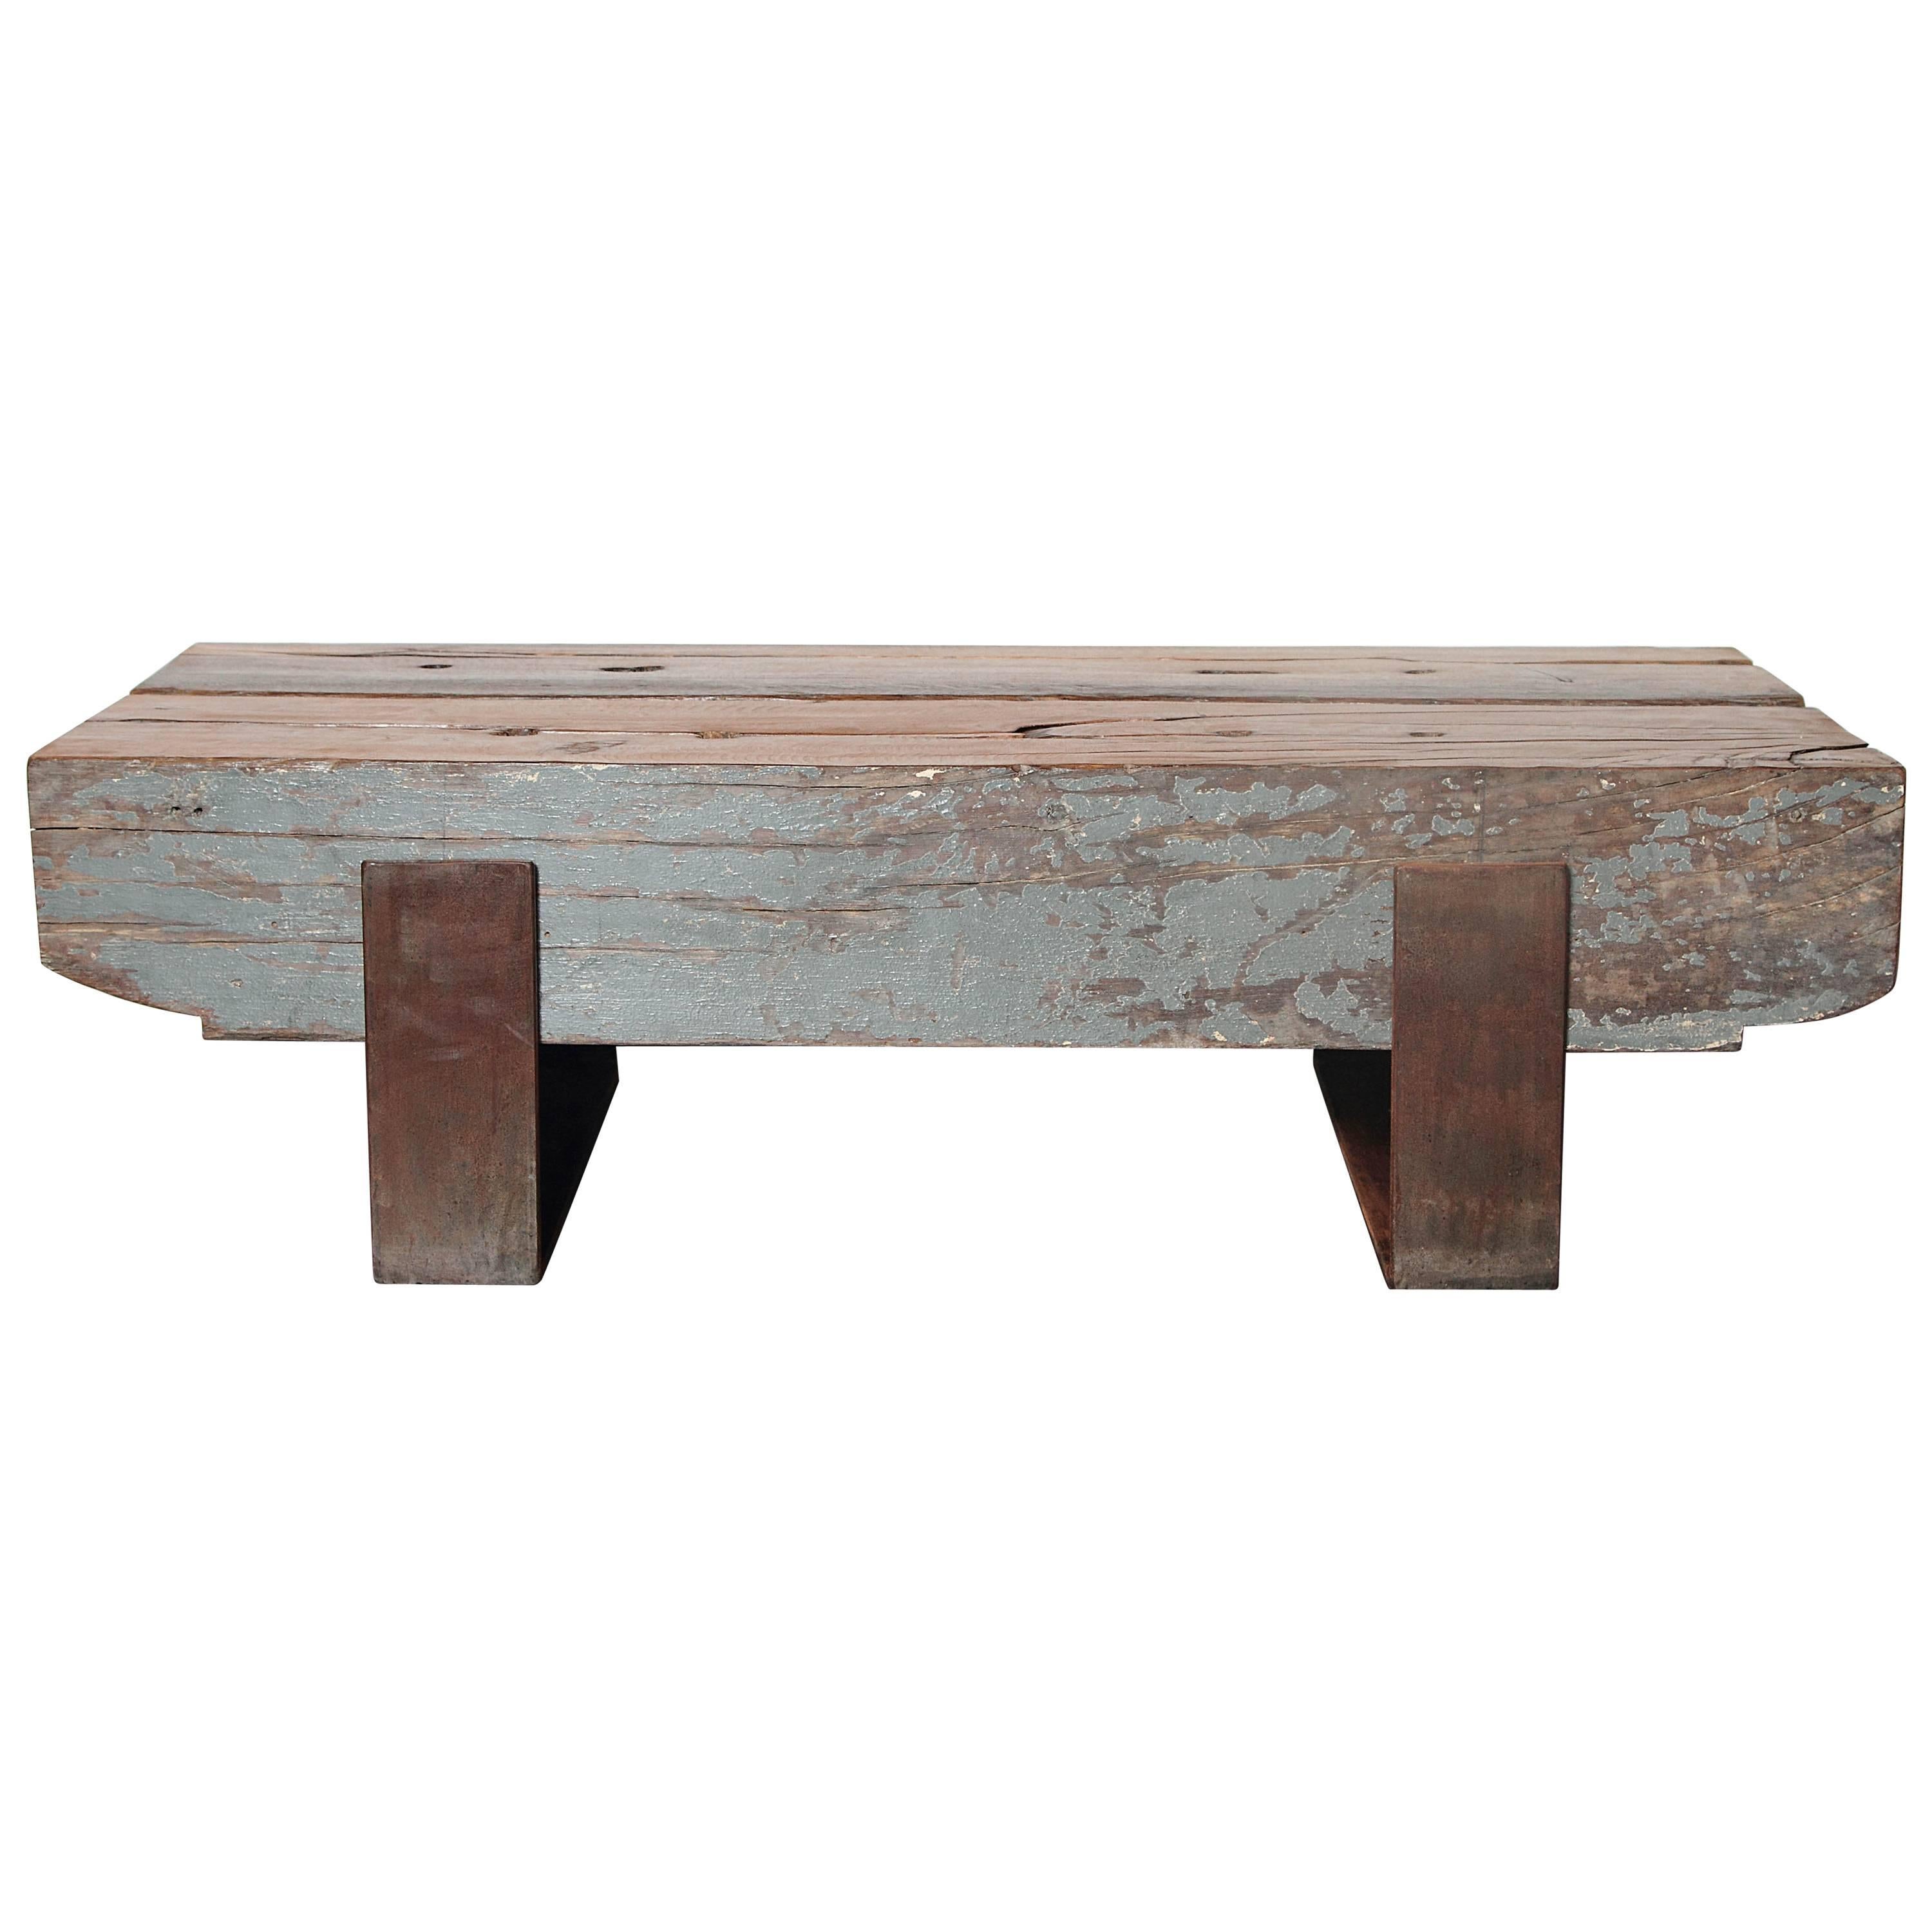 Antique French architectural elements as modern coffee table
New item, made from reclaimed French wood beams.